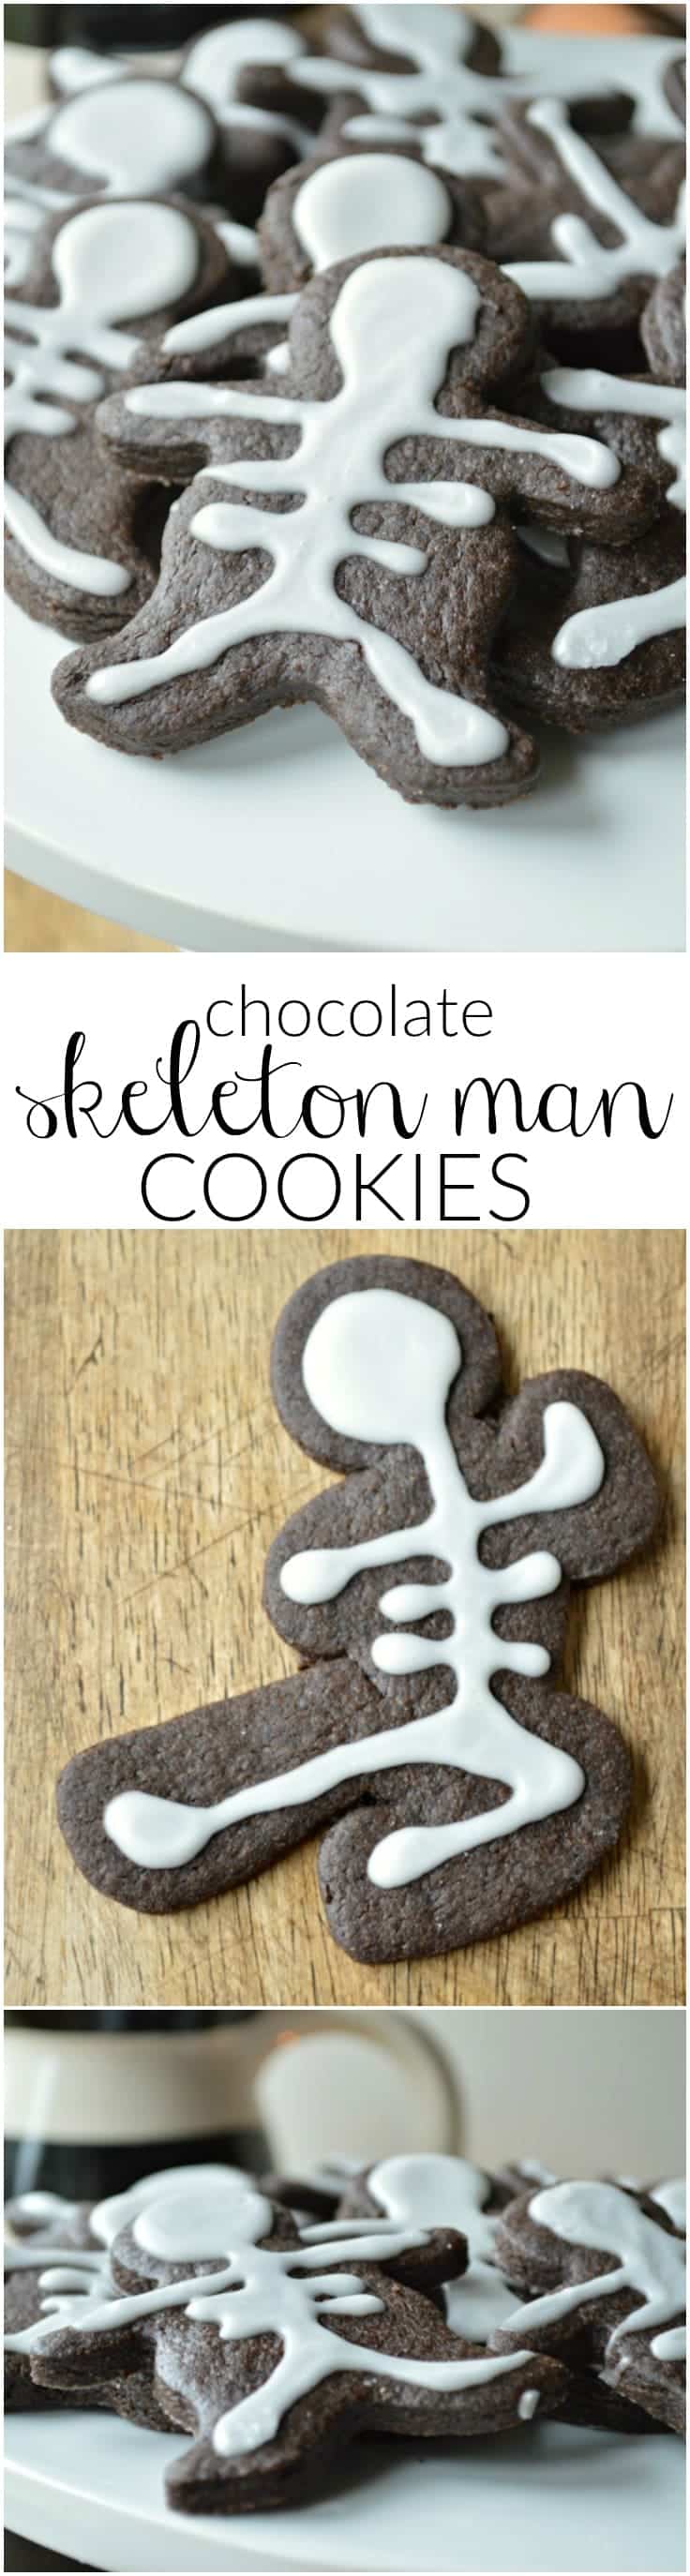 Chocolate Cut Out Cookies that are perfect for Halloween! Chocolate Skeleton Men Cookies are simple, fun treats!